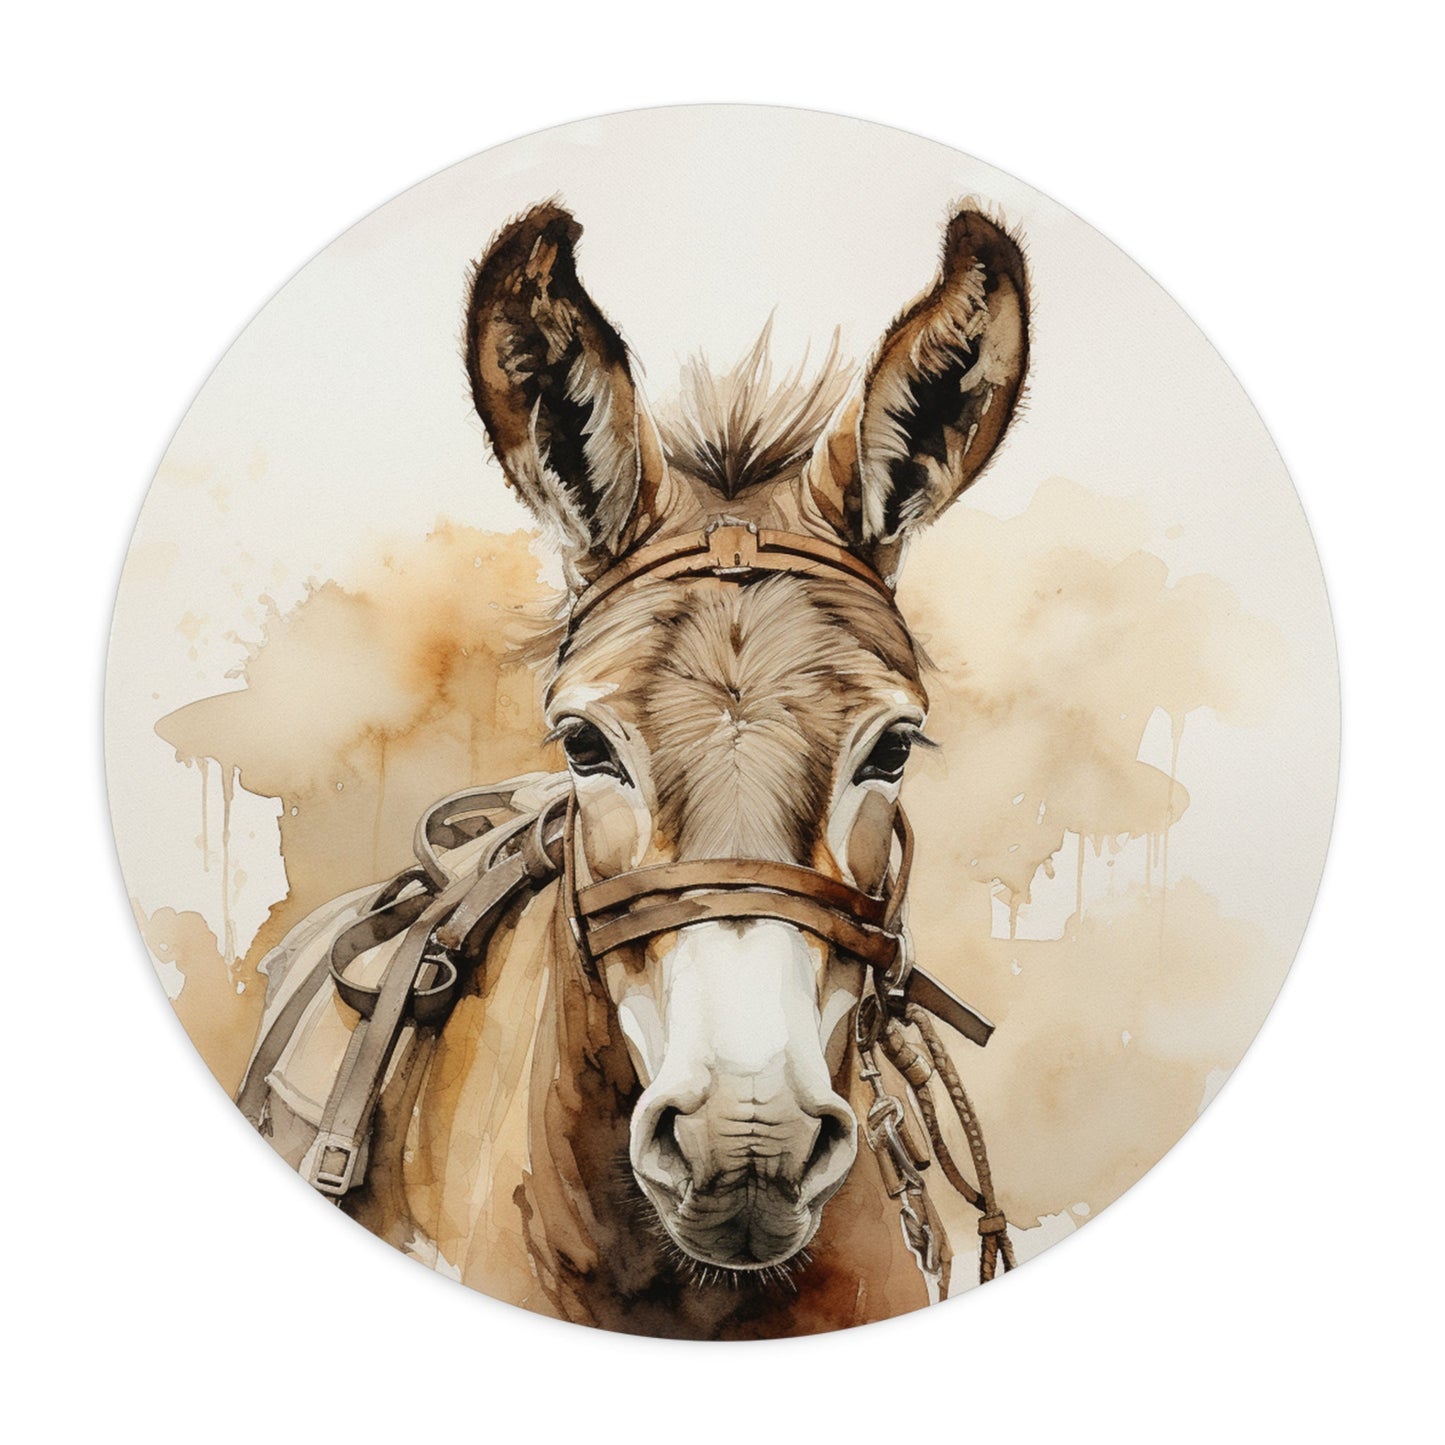 Cute Donkey in Harness Mouse Pad, Personalized Donkey Mouse Pad - FlooredByArt